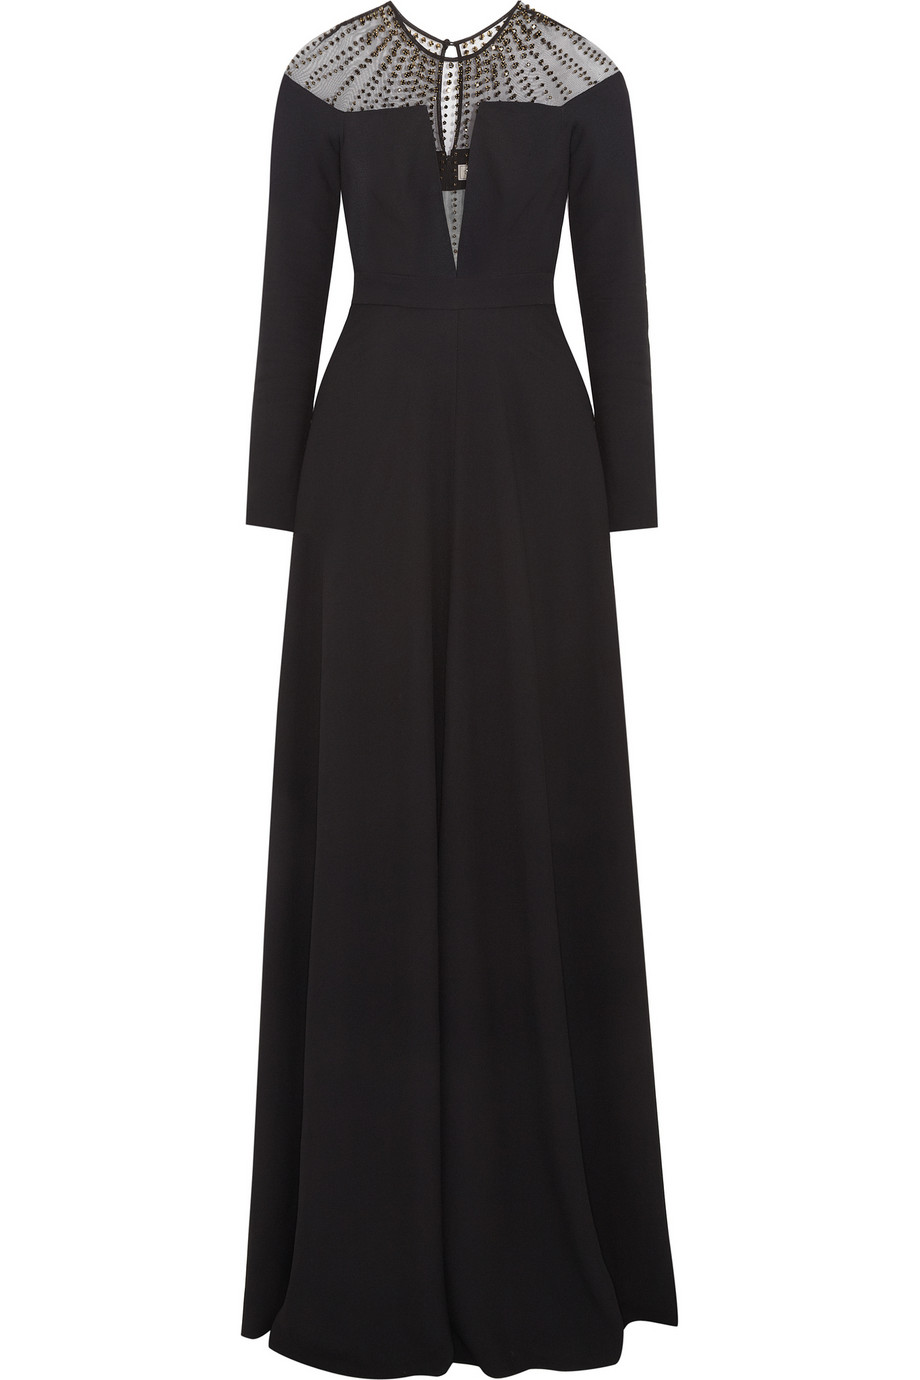 Temperley London Embellished Tulle-paneled Crepe Gown in Black - Lyst